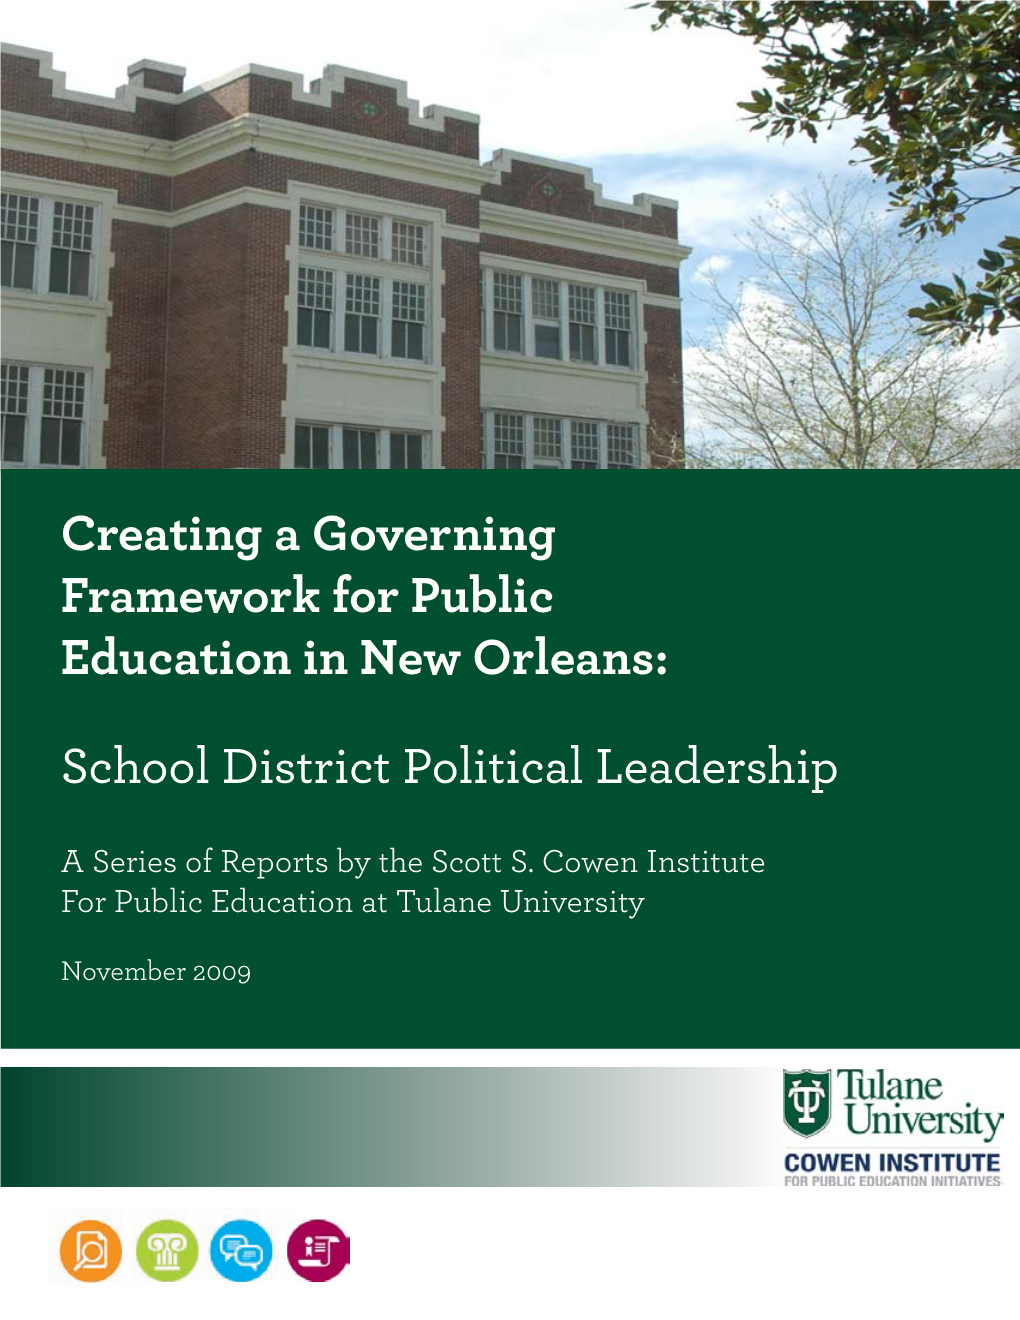 Creating a Governing Framework for Public Education in New Orleans